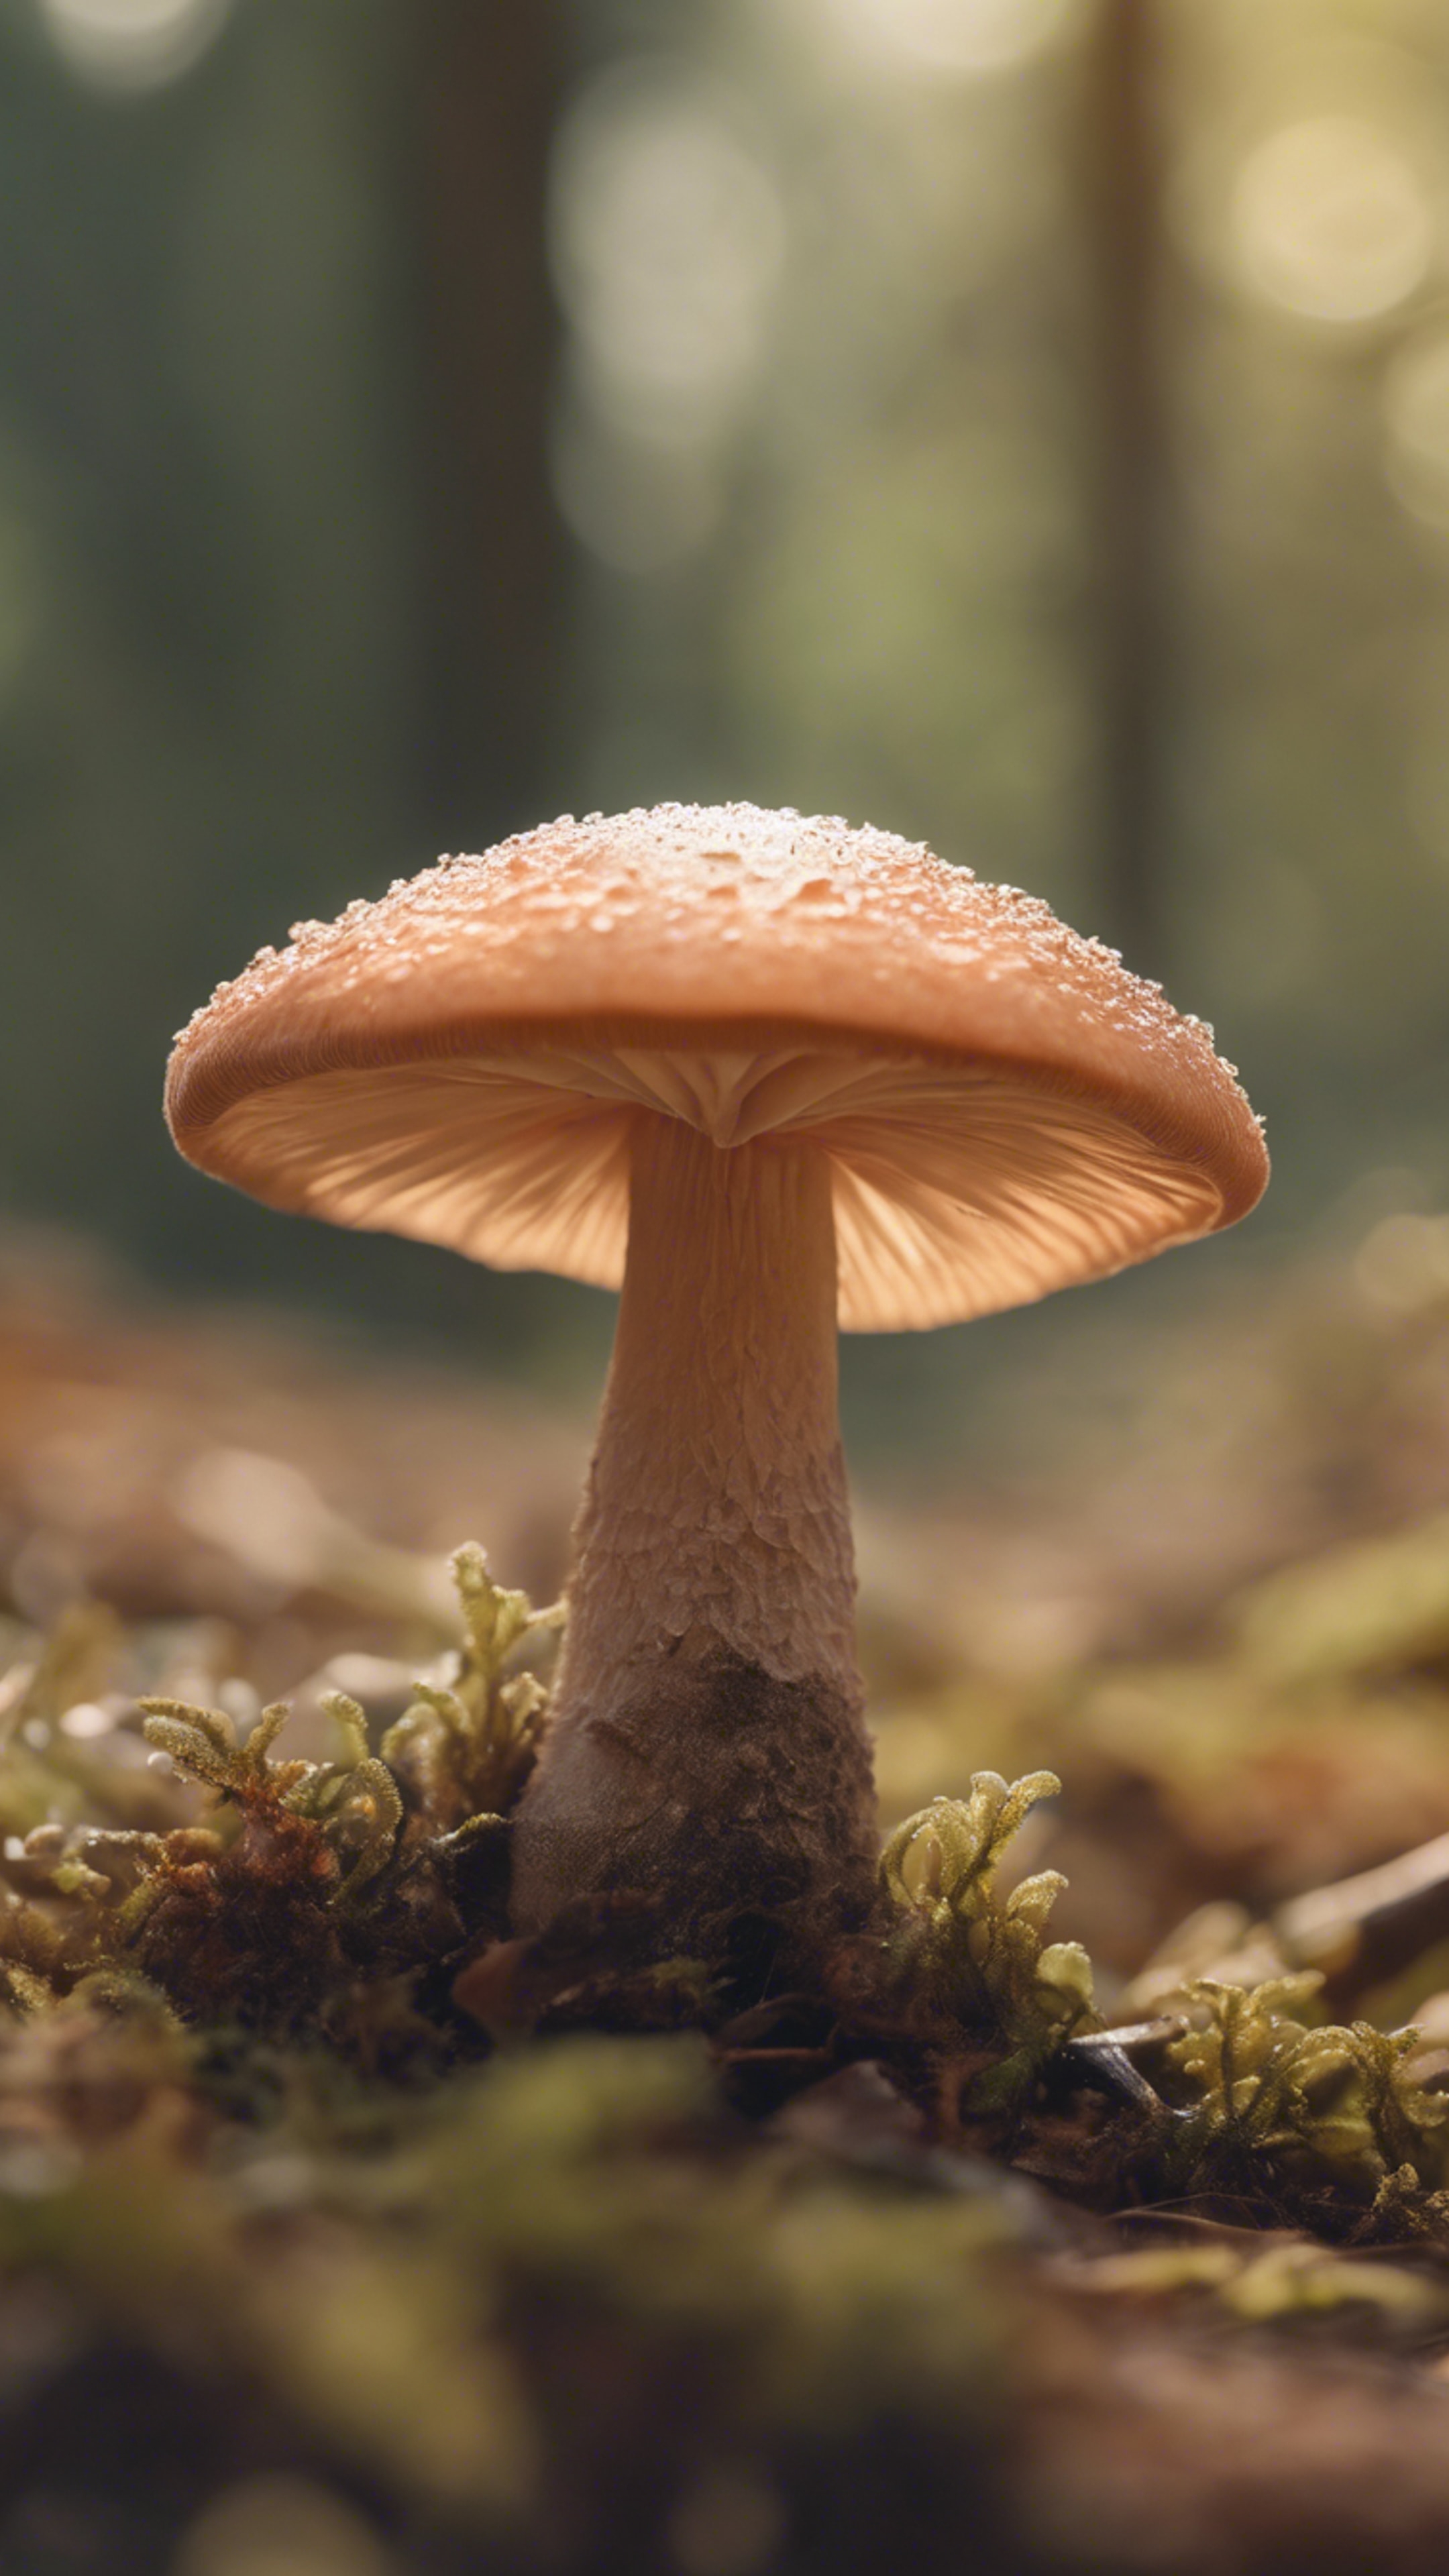 A close-up of a small, cute mushroom, peach color, with soft, sunlit forest scenery in the background. Tapet[125df3bad49b42d8bf38]